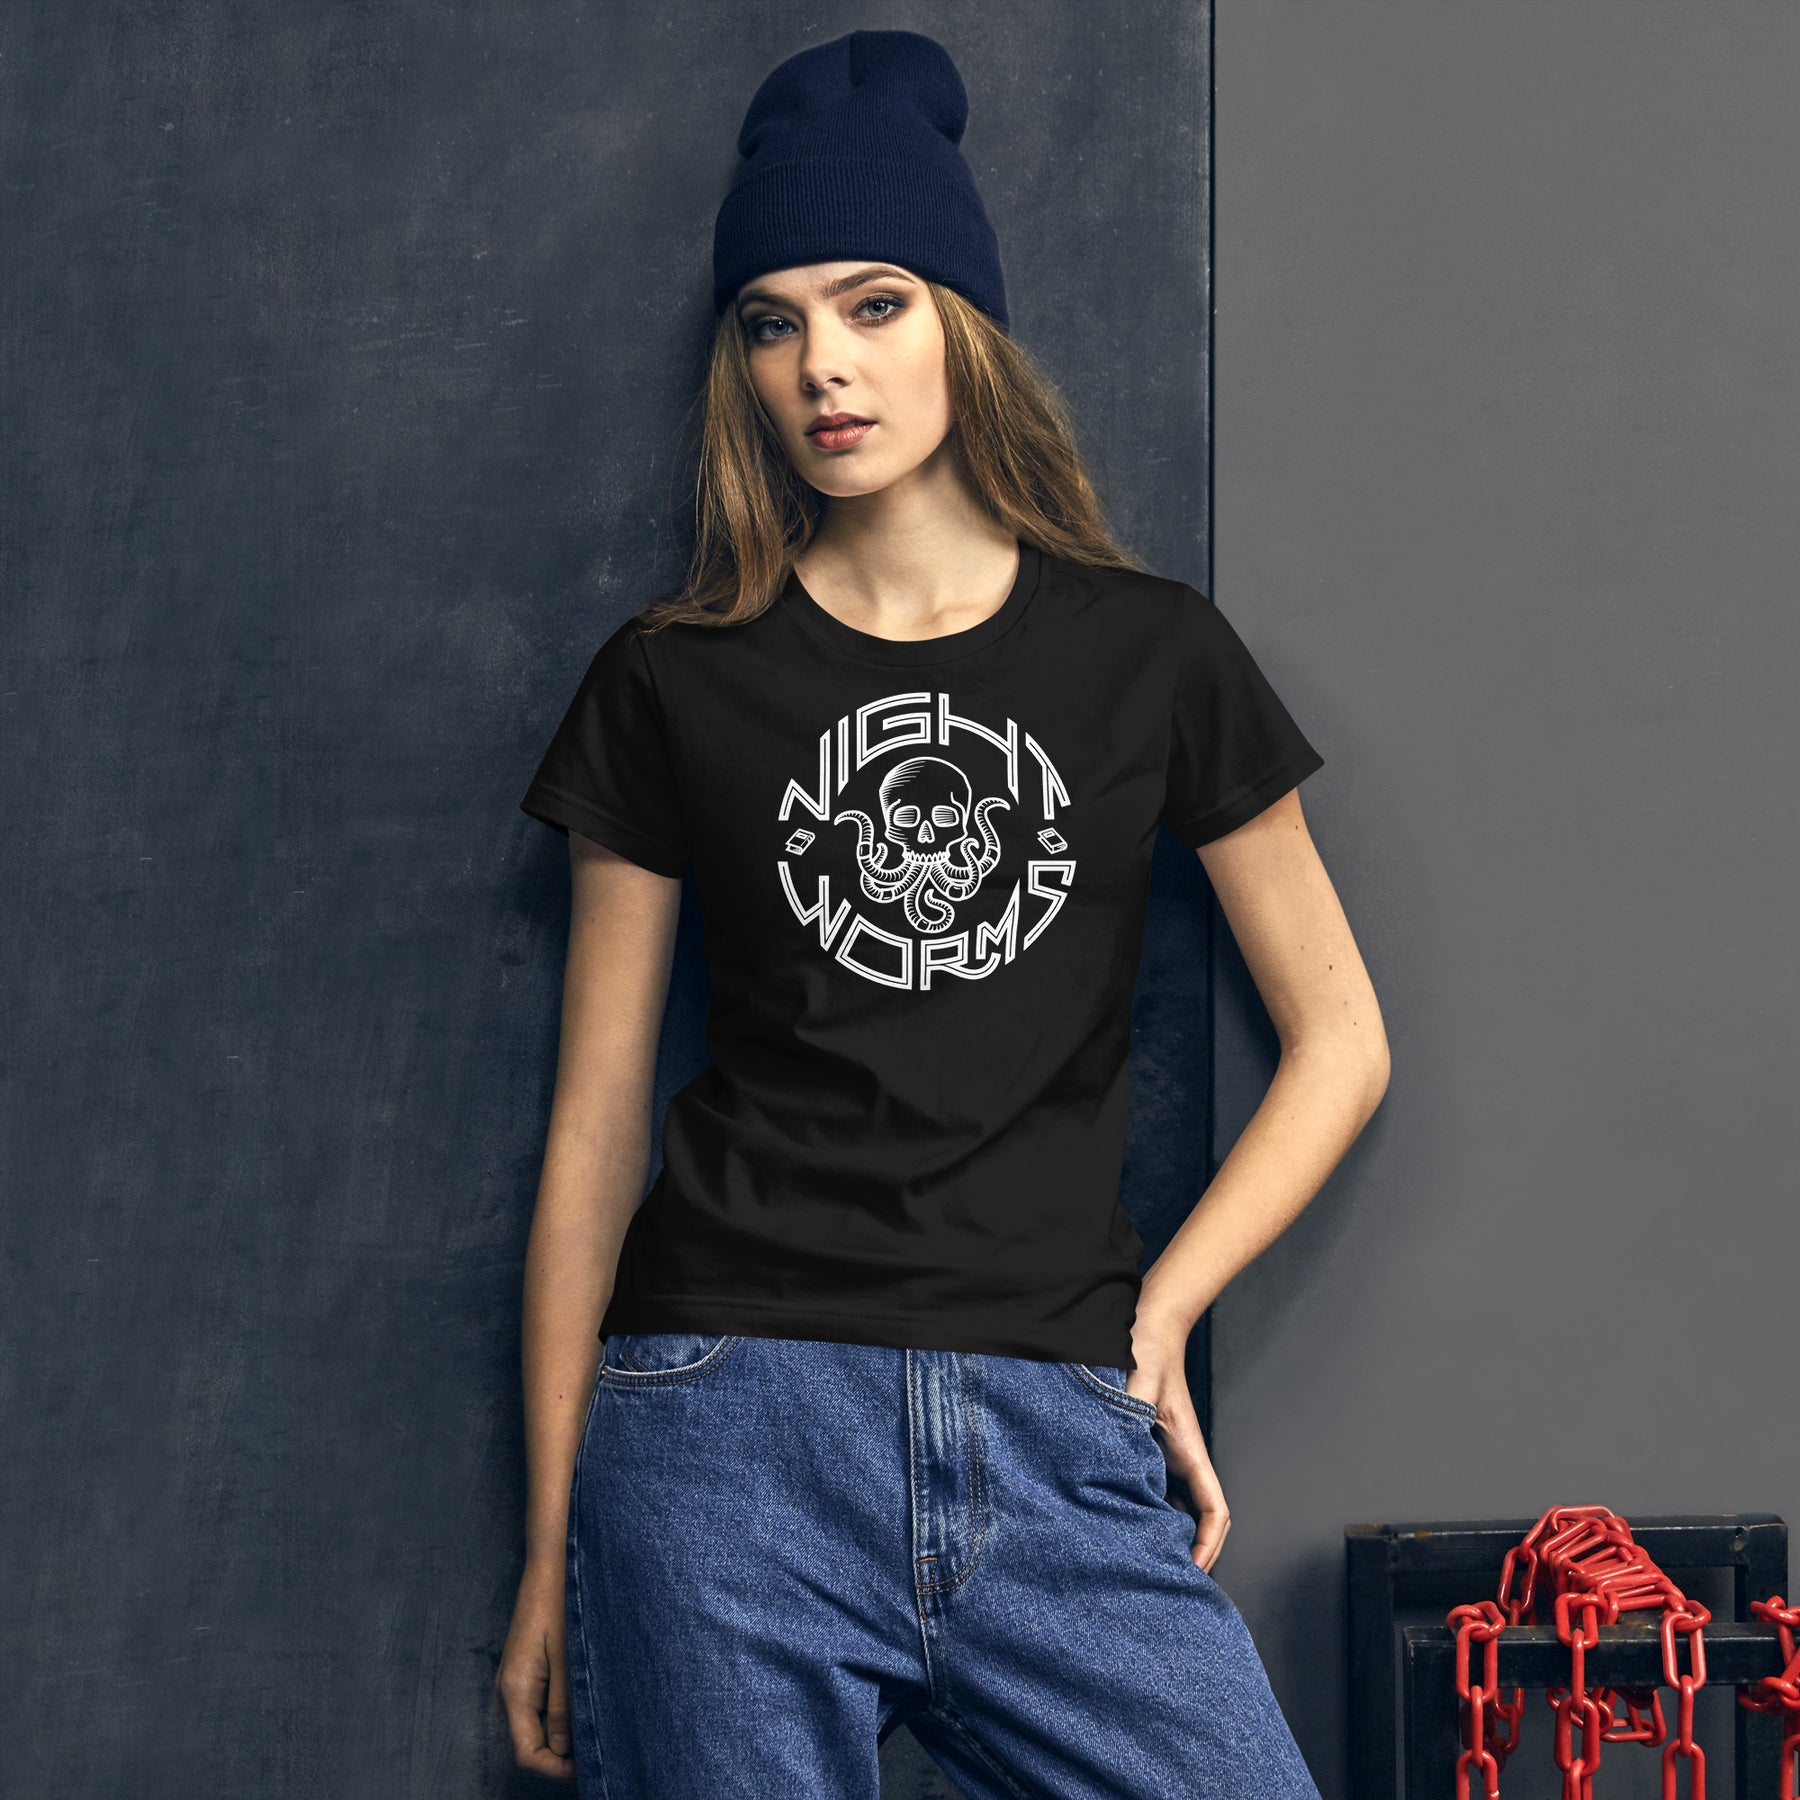 "Support Night Worms" Women's Fitted T-shirt